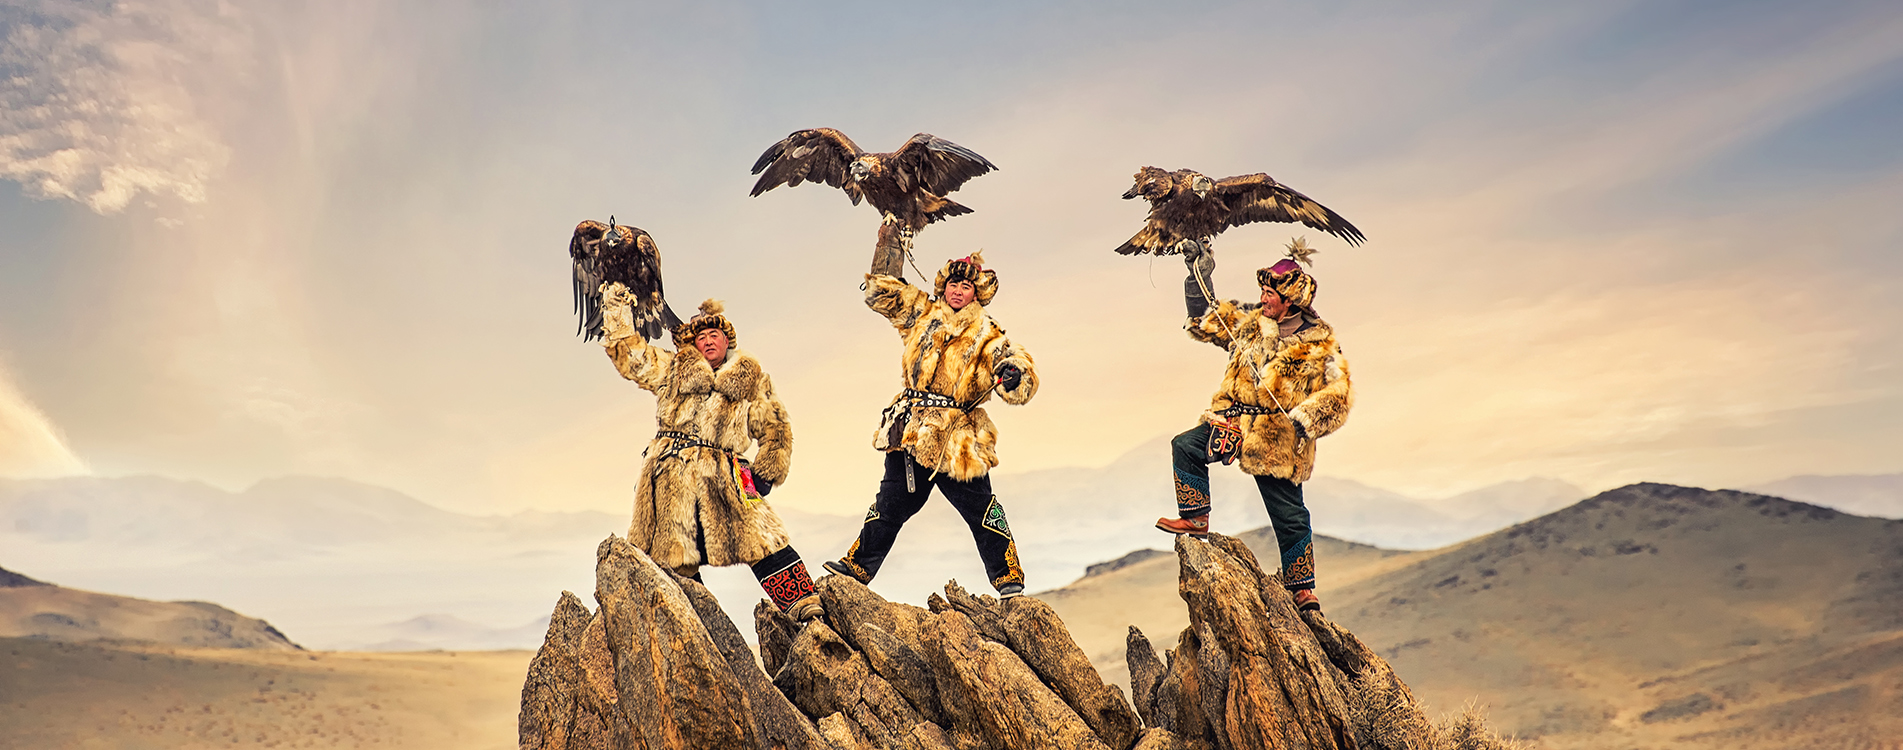 Mongolia’s Fascinating Eagle Hunting Tradition and the Golden Eagle Festival